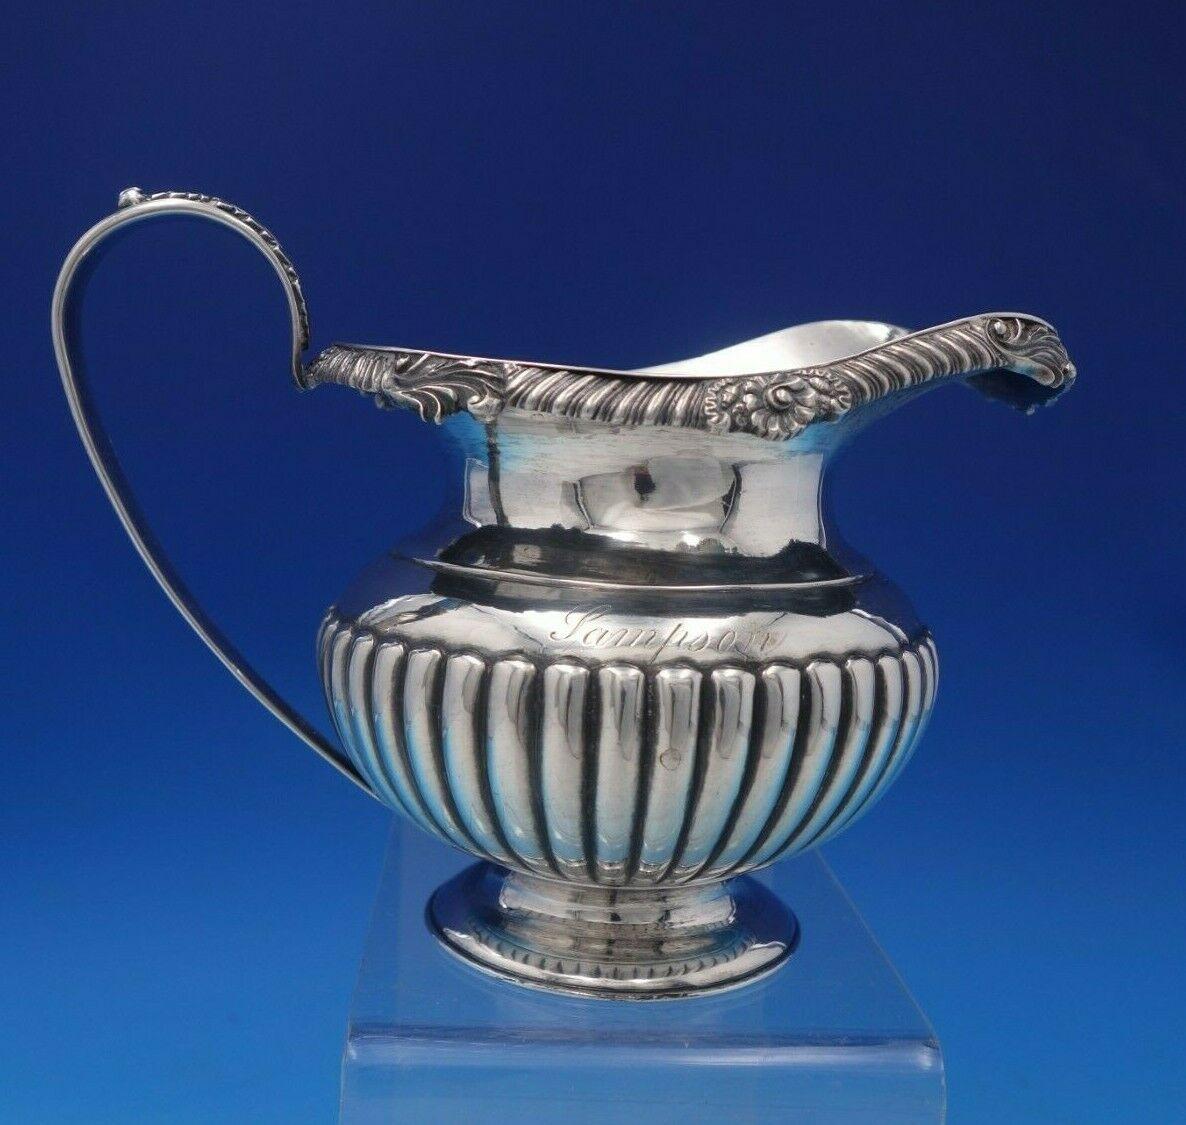 Wong Shing Chinese Export Sterling Silver Tea Set 3pc c.1840-1870 '#6462' For Sale 4